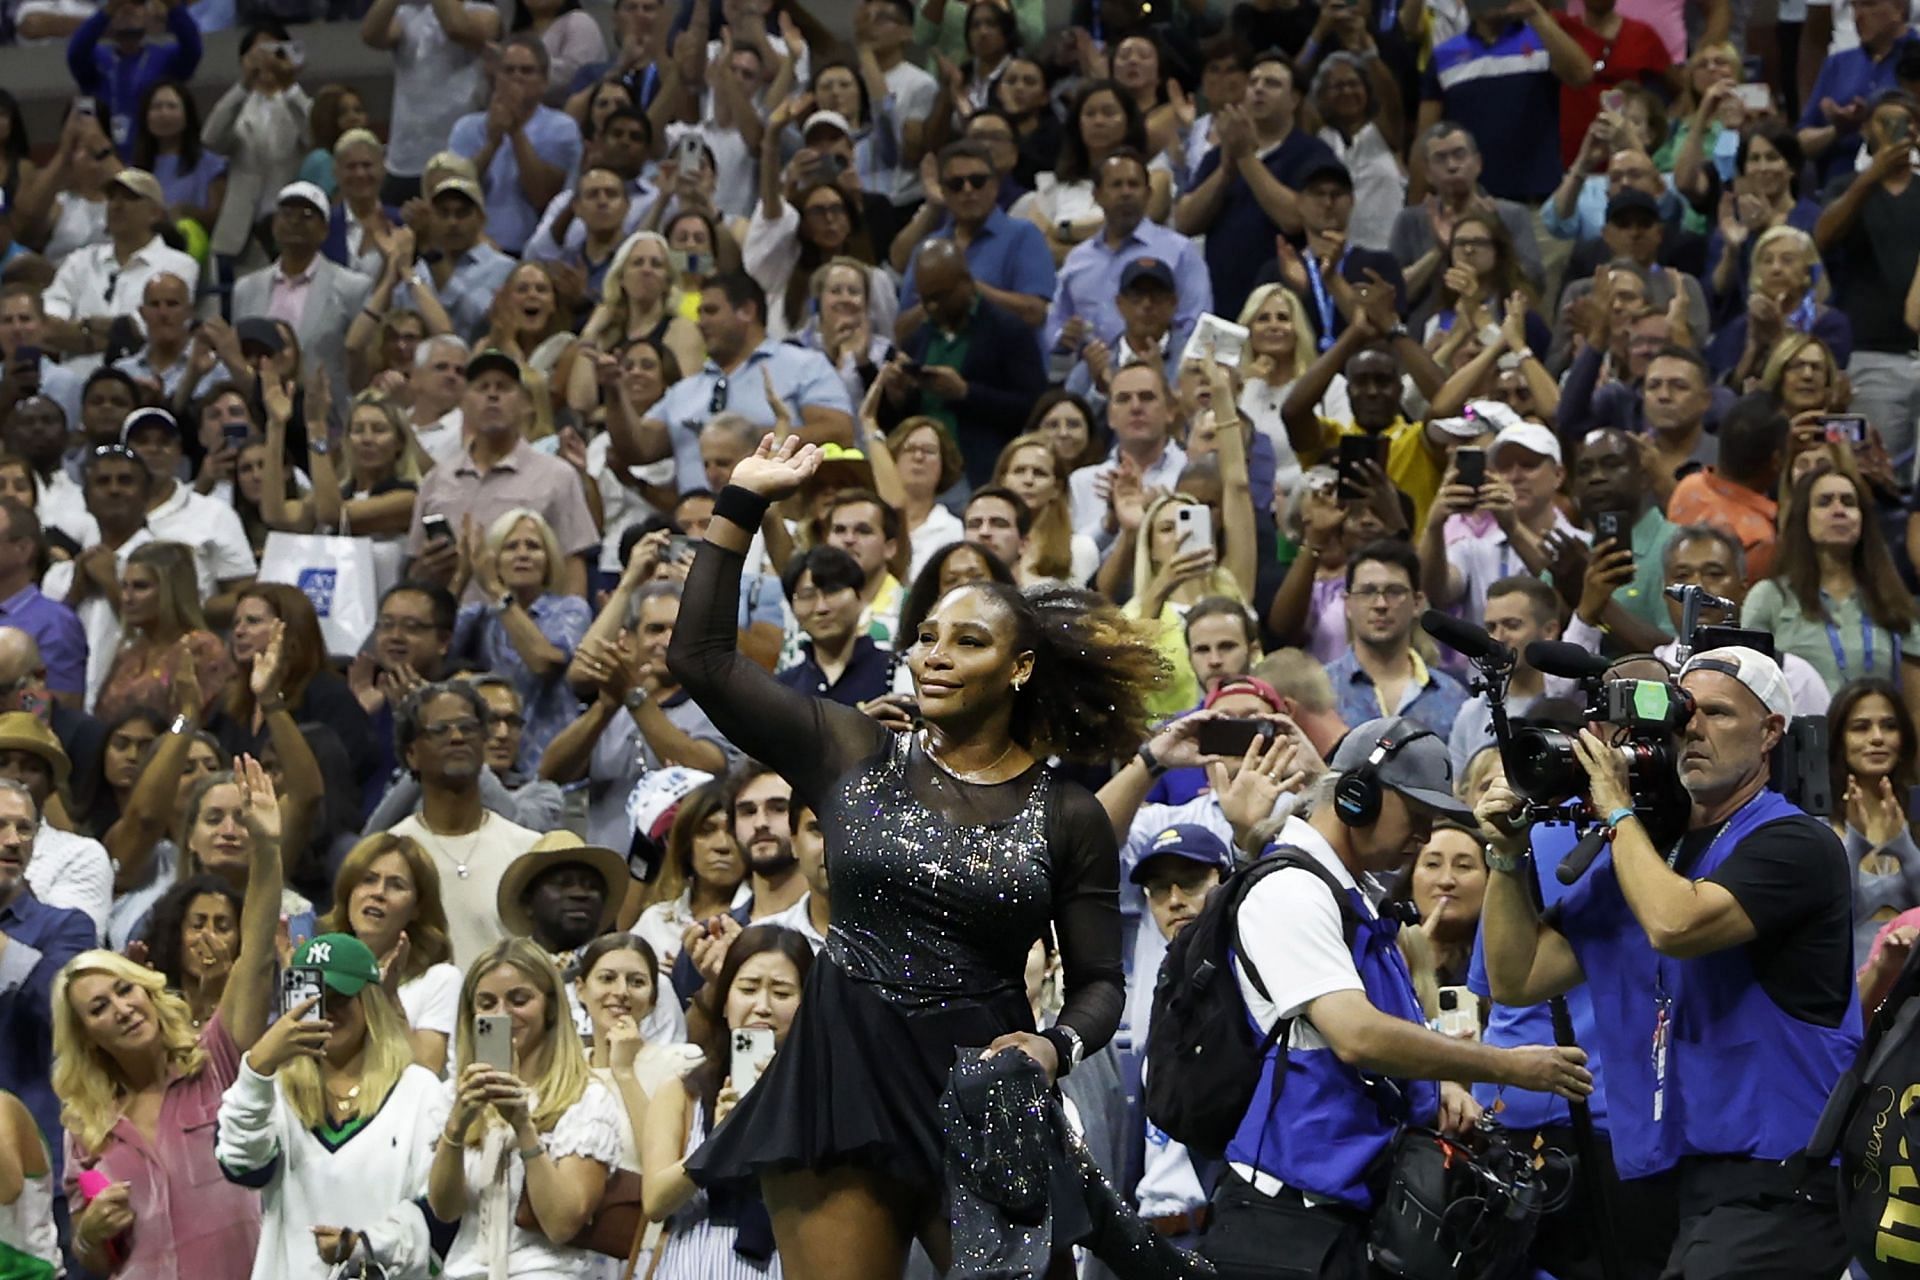 Several NBA stars reacted to Serena Williams' finals tennis match.